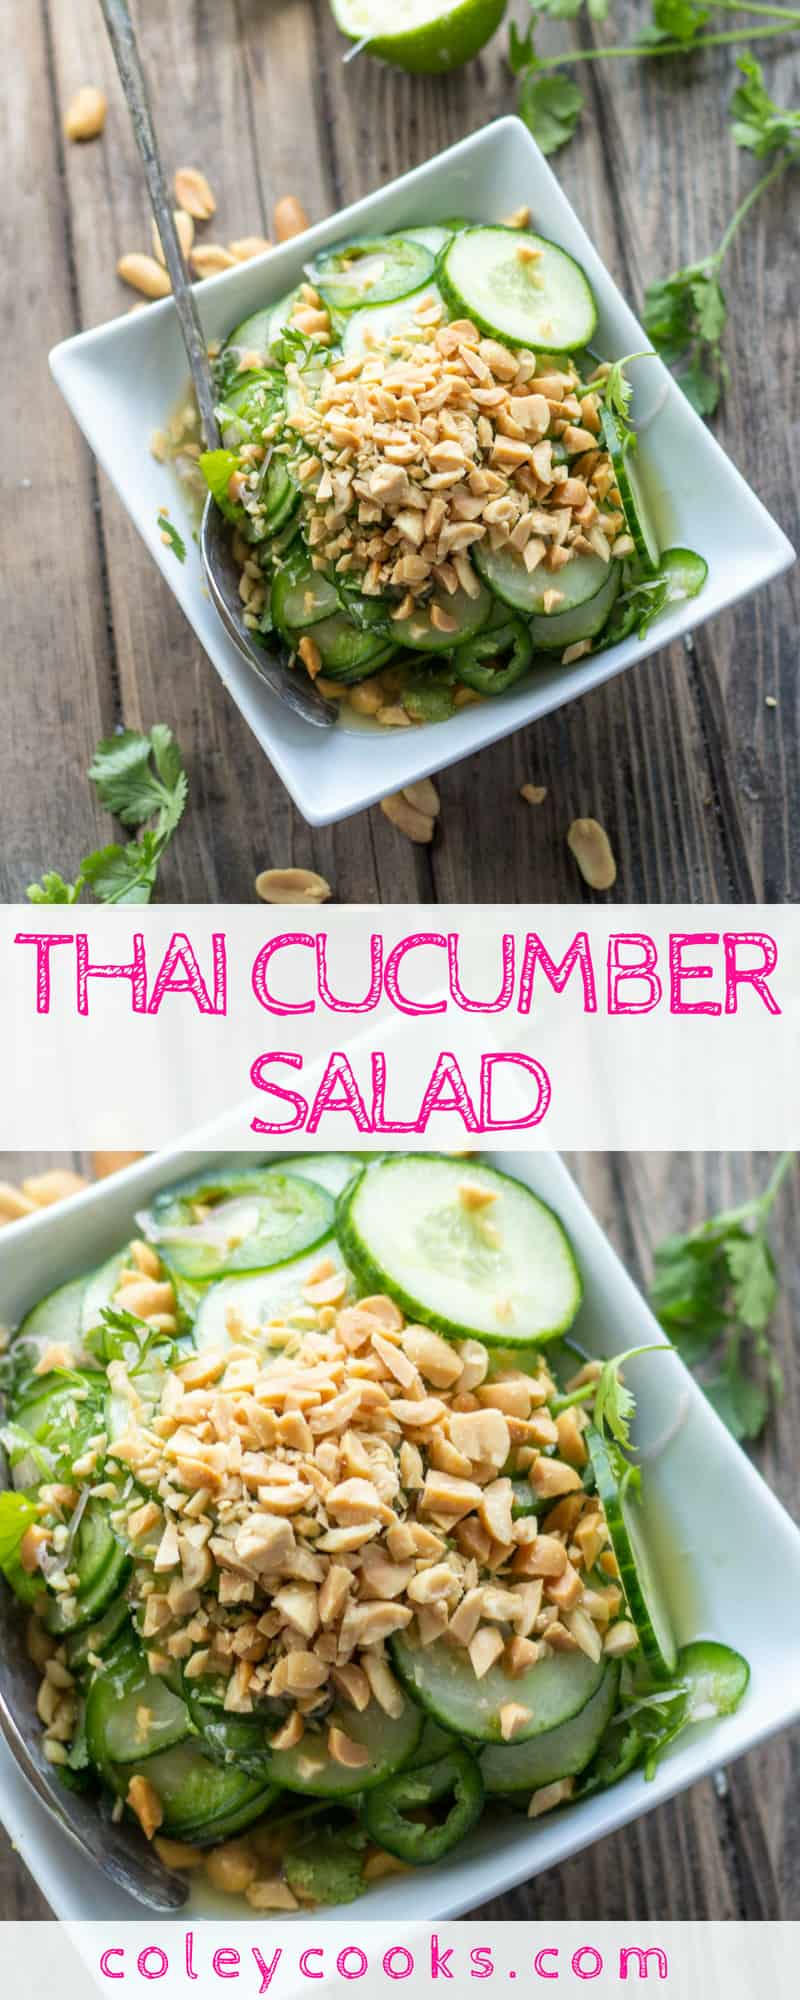 THAI CUCUMBER SALAD | This easy summer salad recipe is light, crisp, and loaded with Thai flavor! Spicy from jalapeños and great crunch from roasted peanuts. #plantbased #recipe #Thai #cucumber #salad #summer | ColeyCooks.com